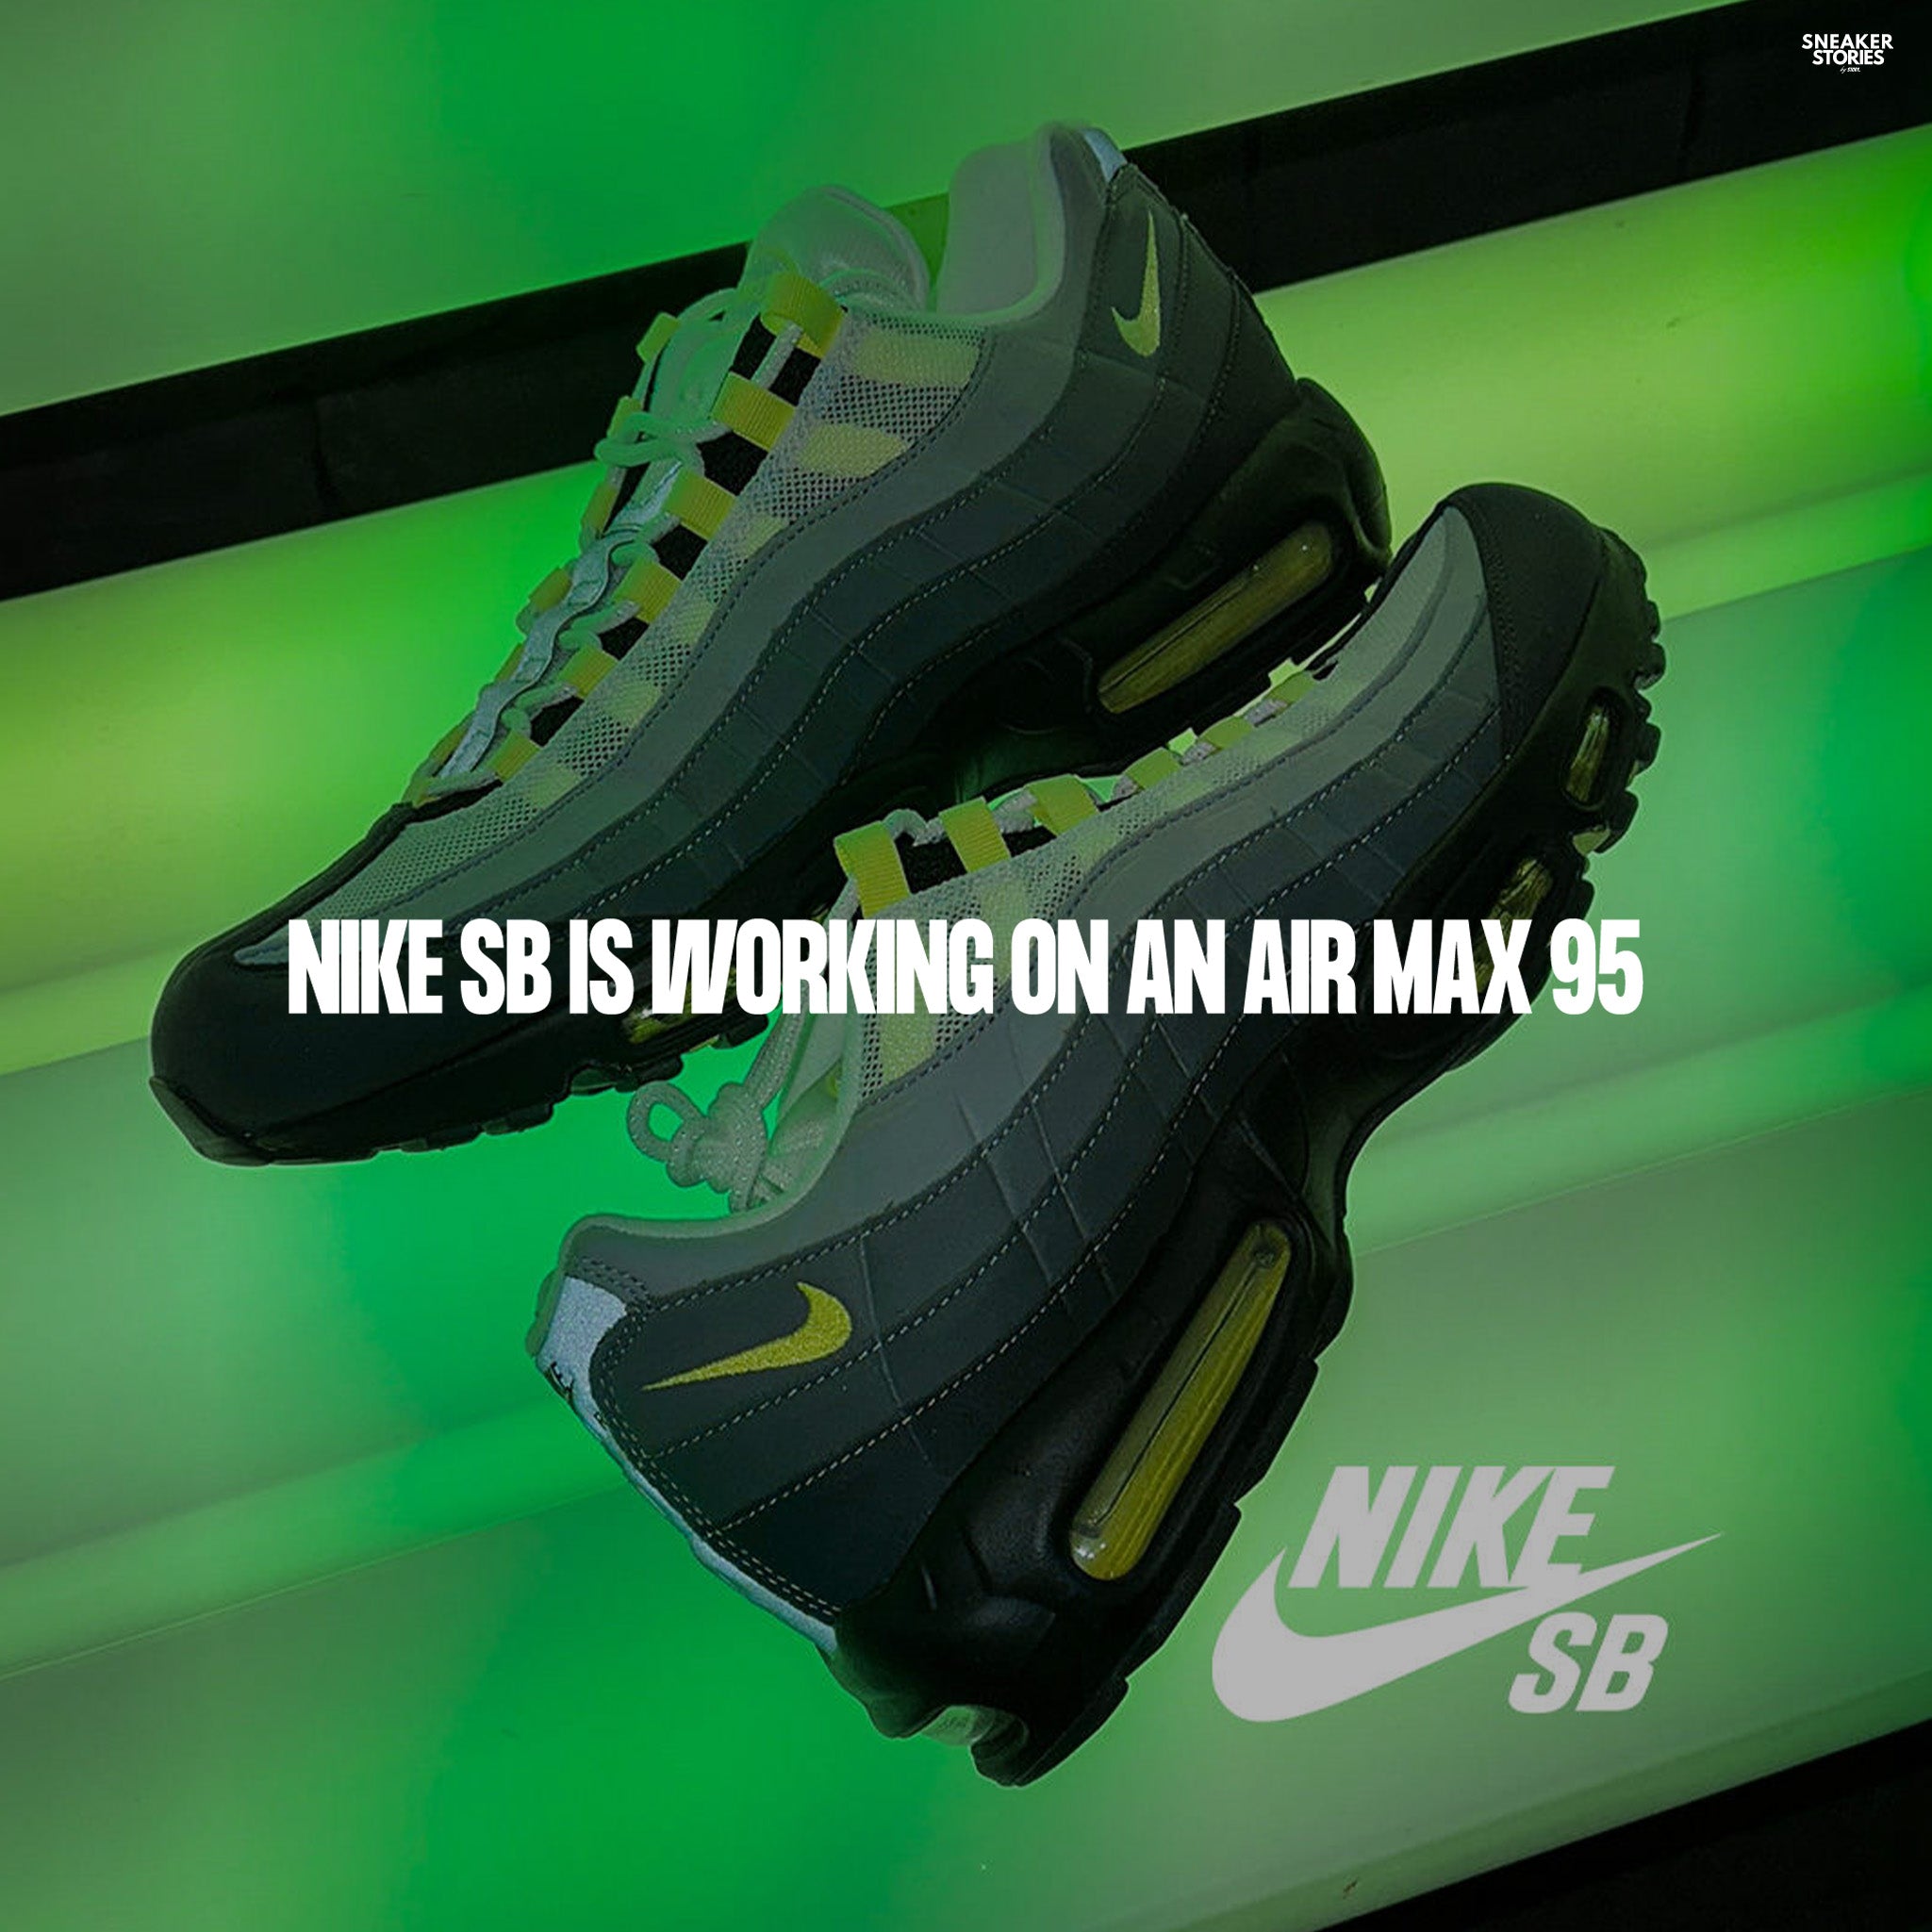 Nike SB is working on an air max 95